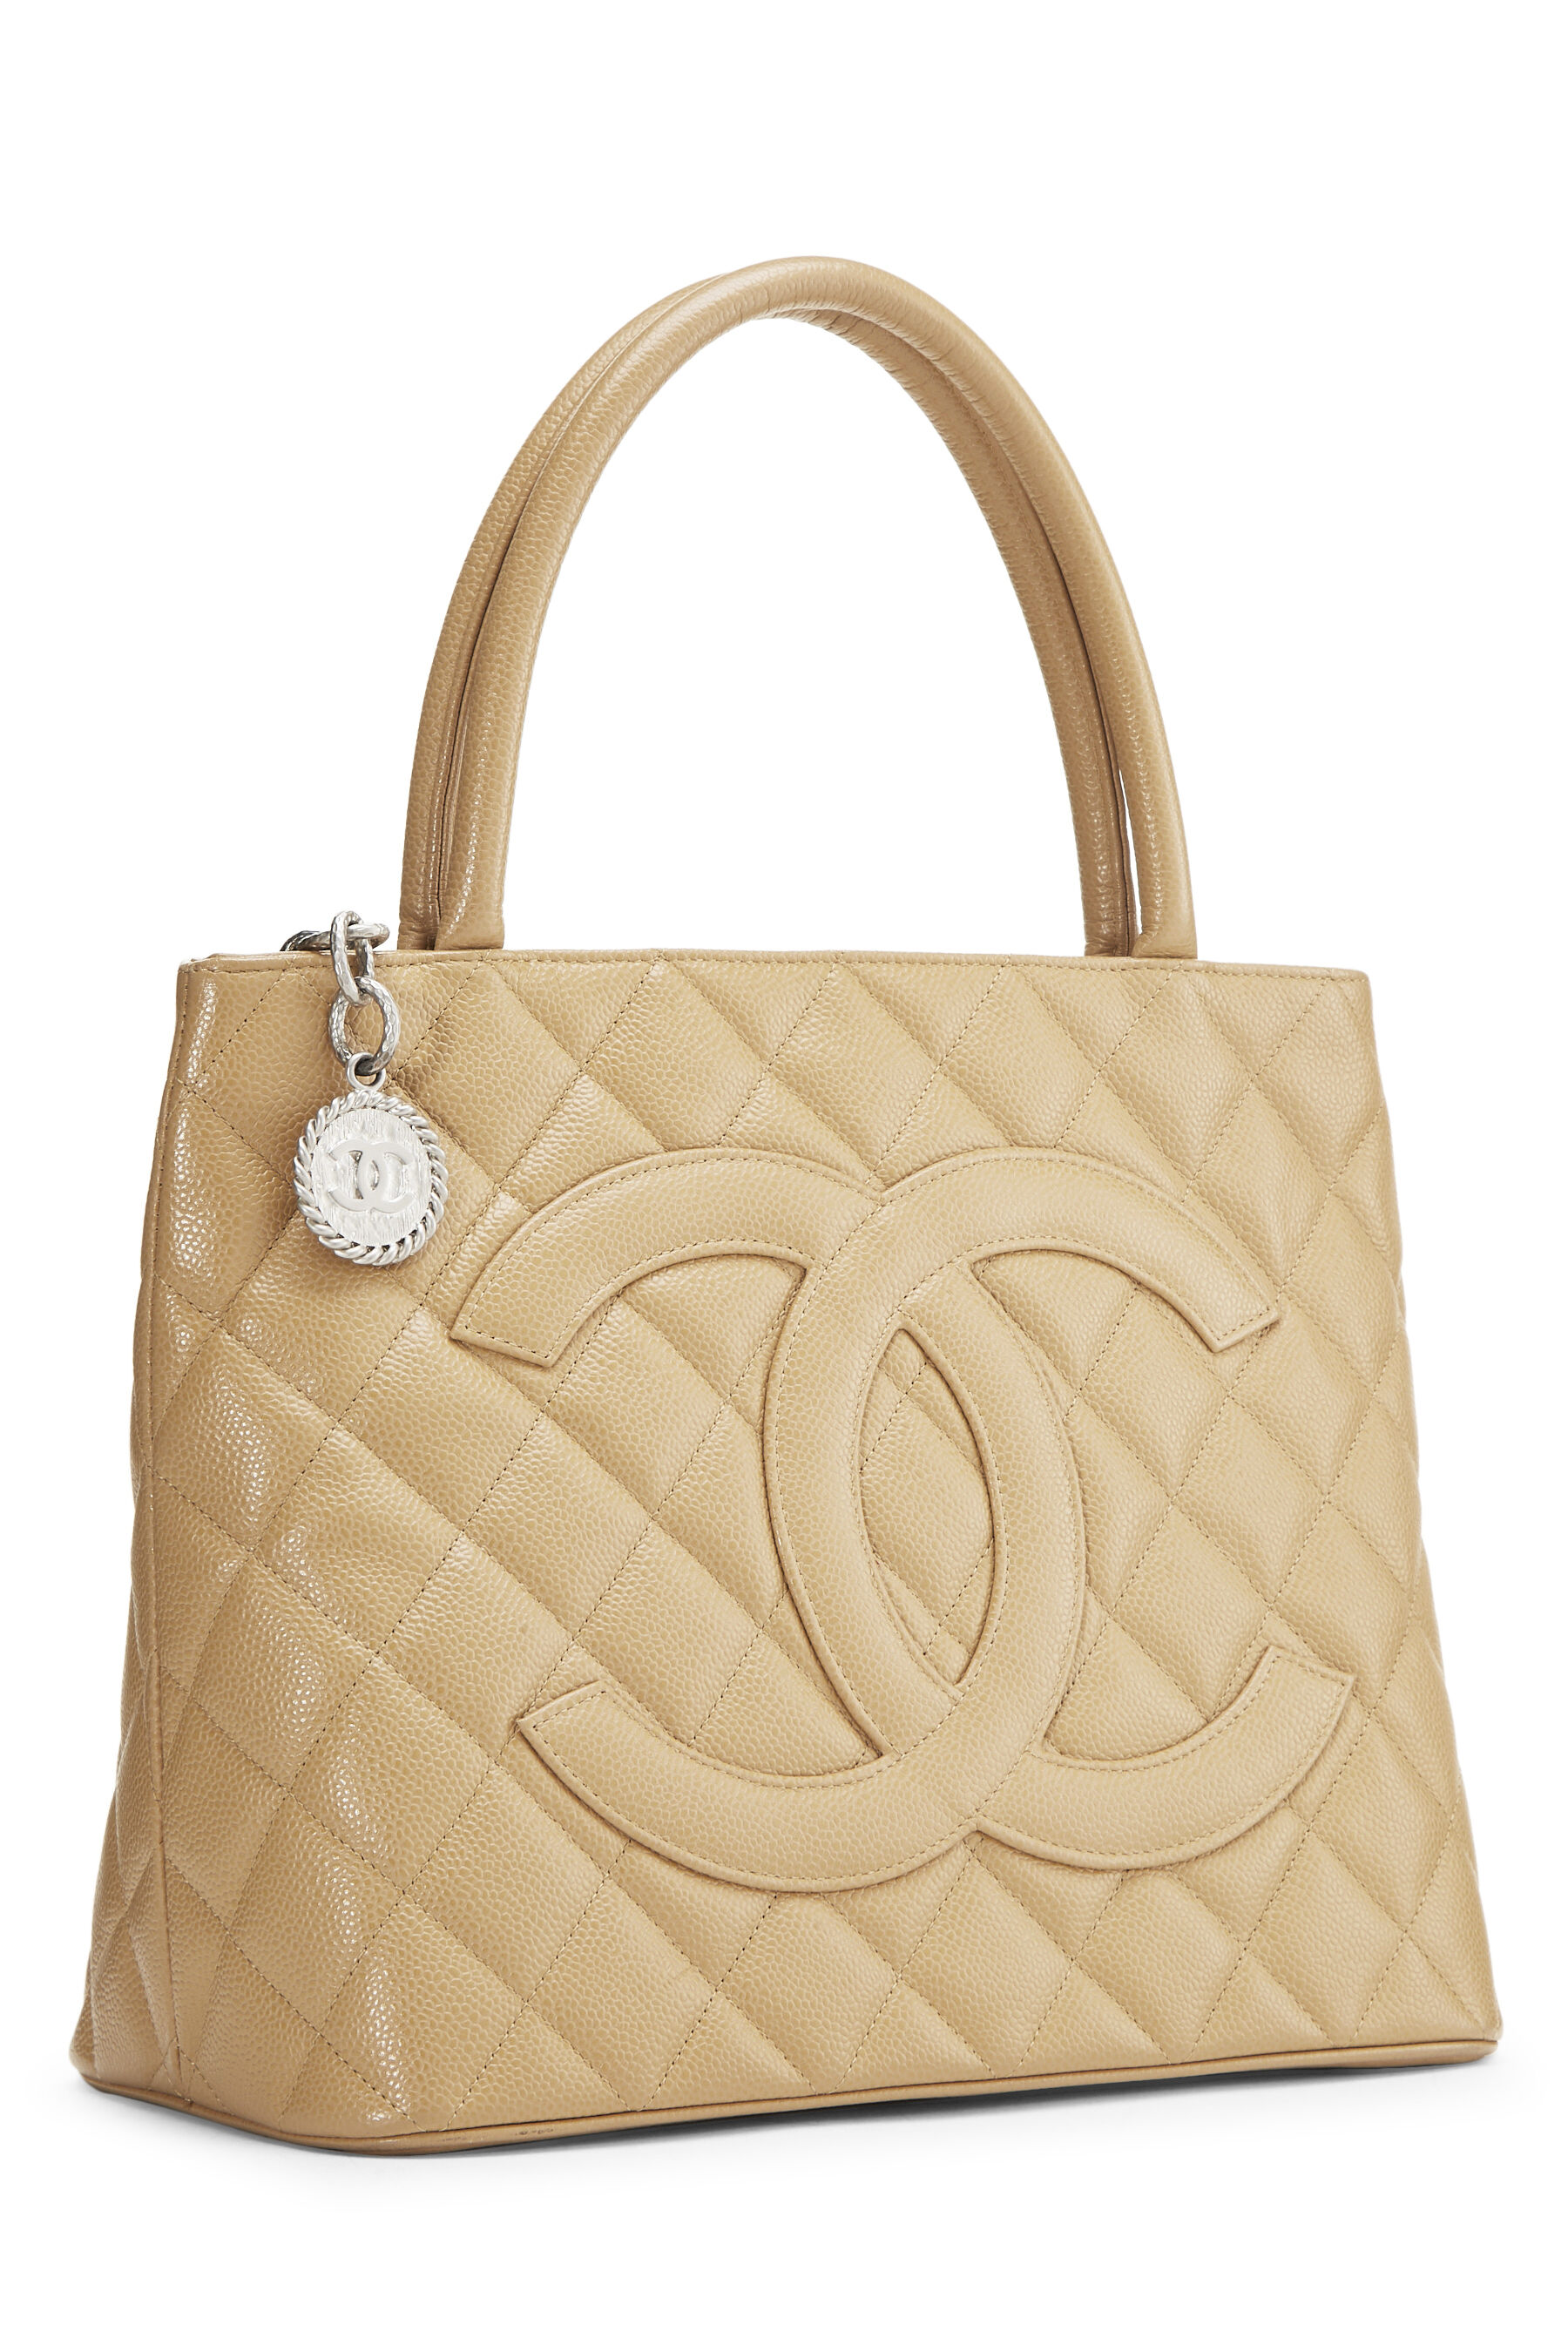 CHANEL Medallion Tote Bag Caviar Skin Leather Beige Auth Women